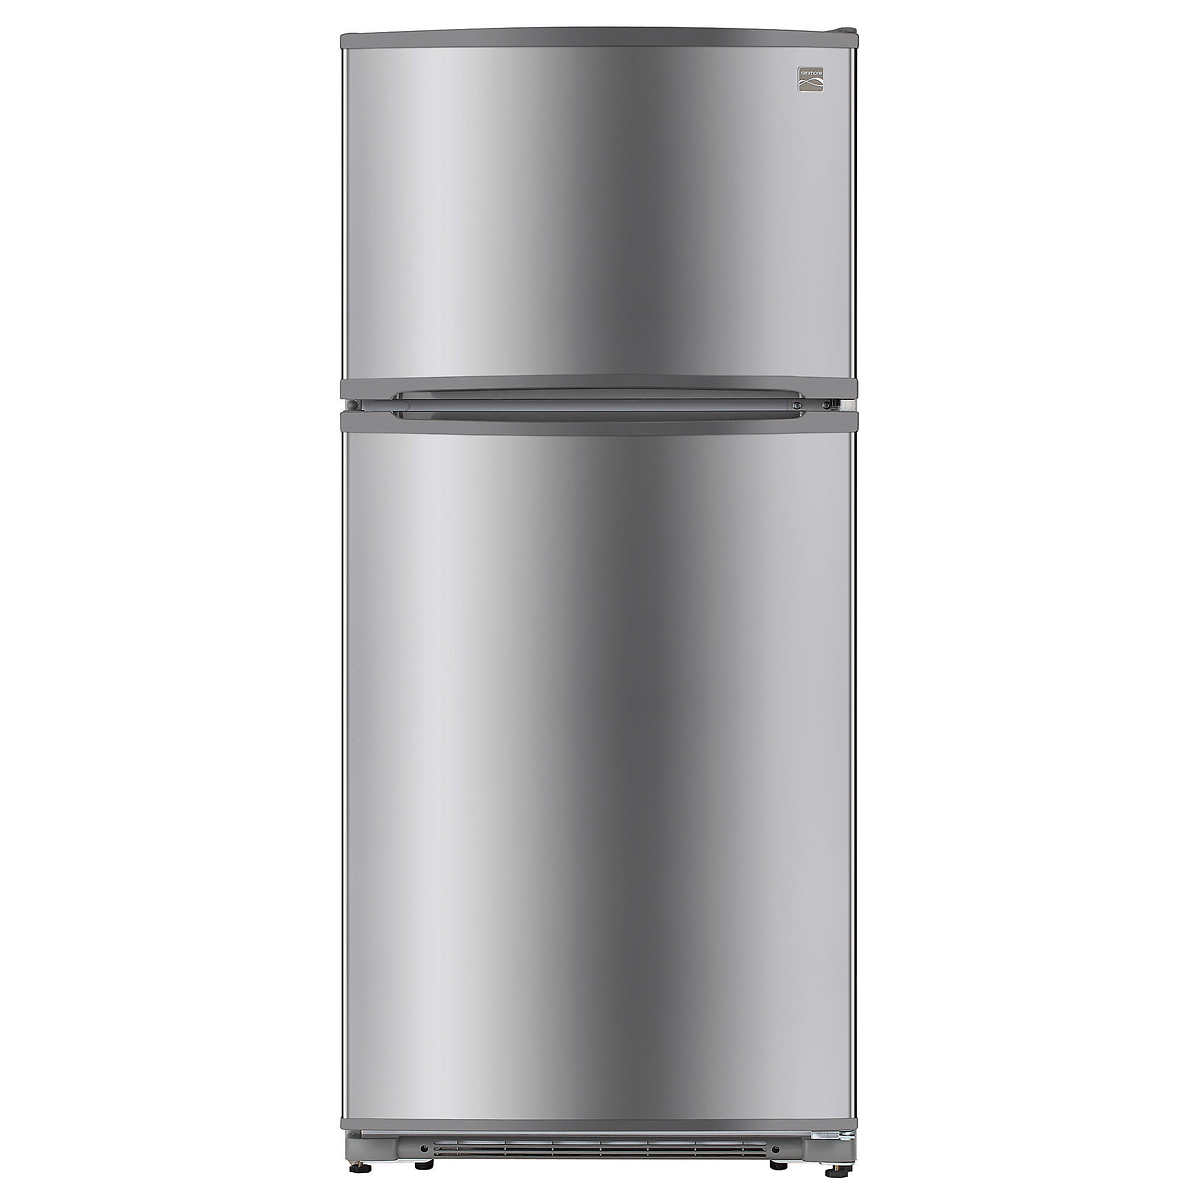 Kenmore 18 Cu Ft Top Freezer, How To Put Shelves Back In Kenmore Refrigerator